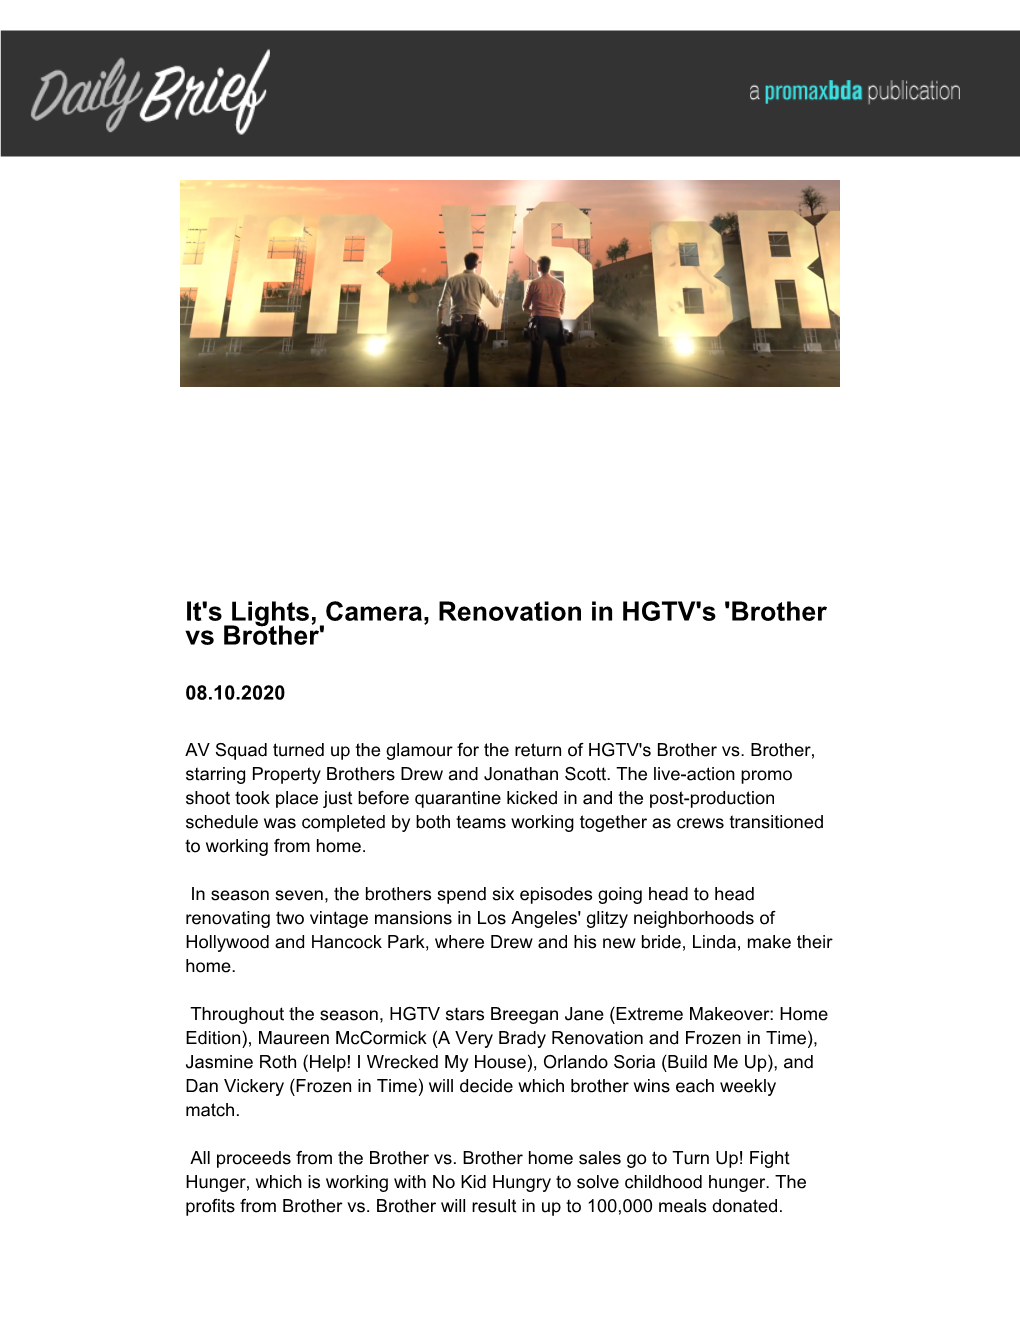 It's Lights, Camera, Renovation in HGTV's 'Brother Vs Brother'